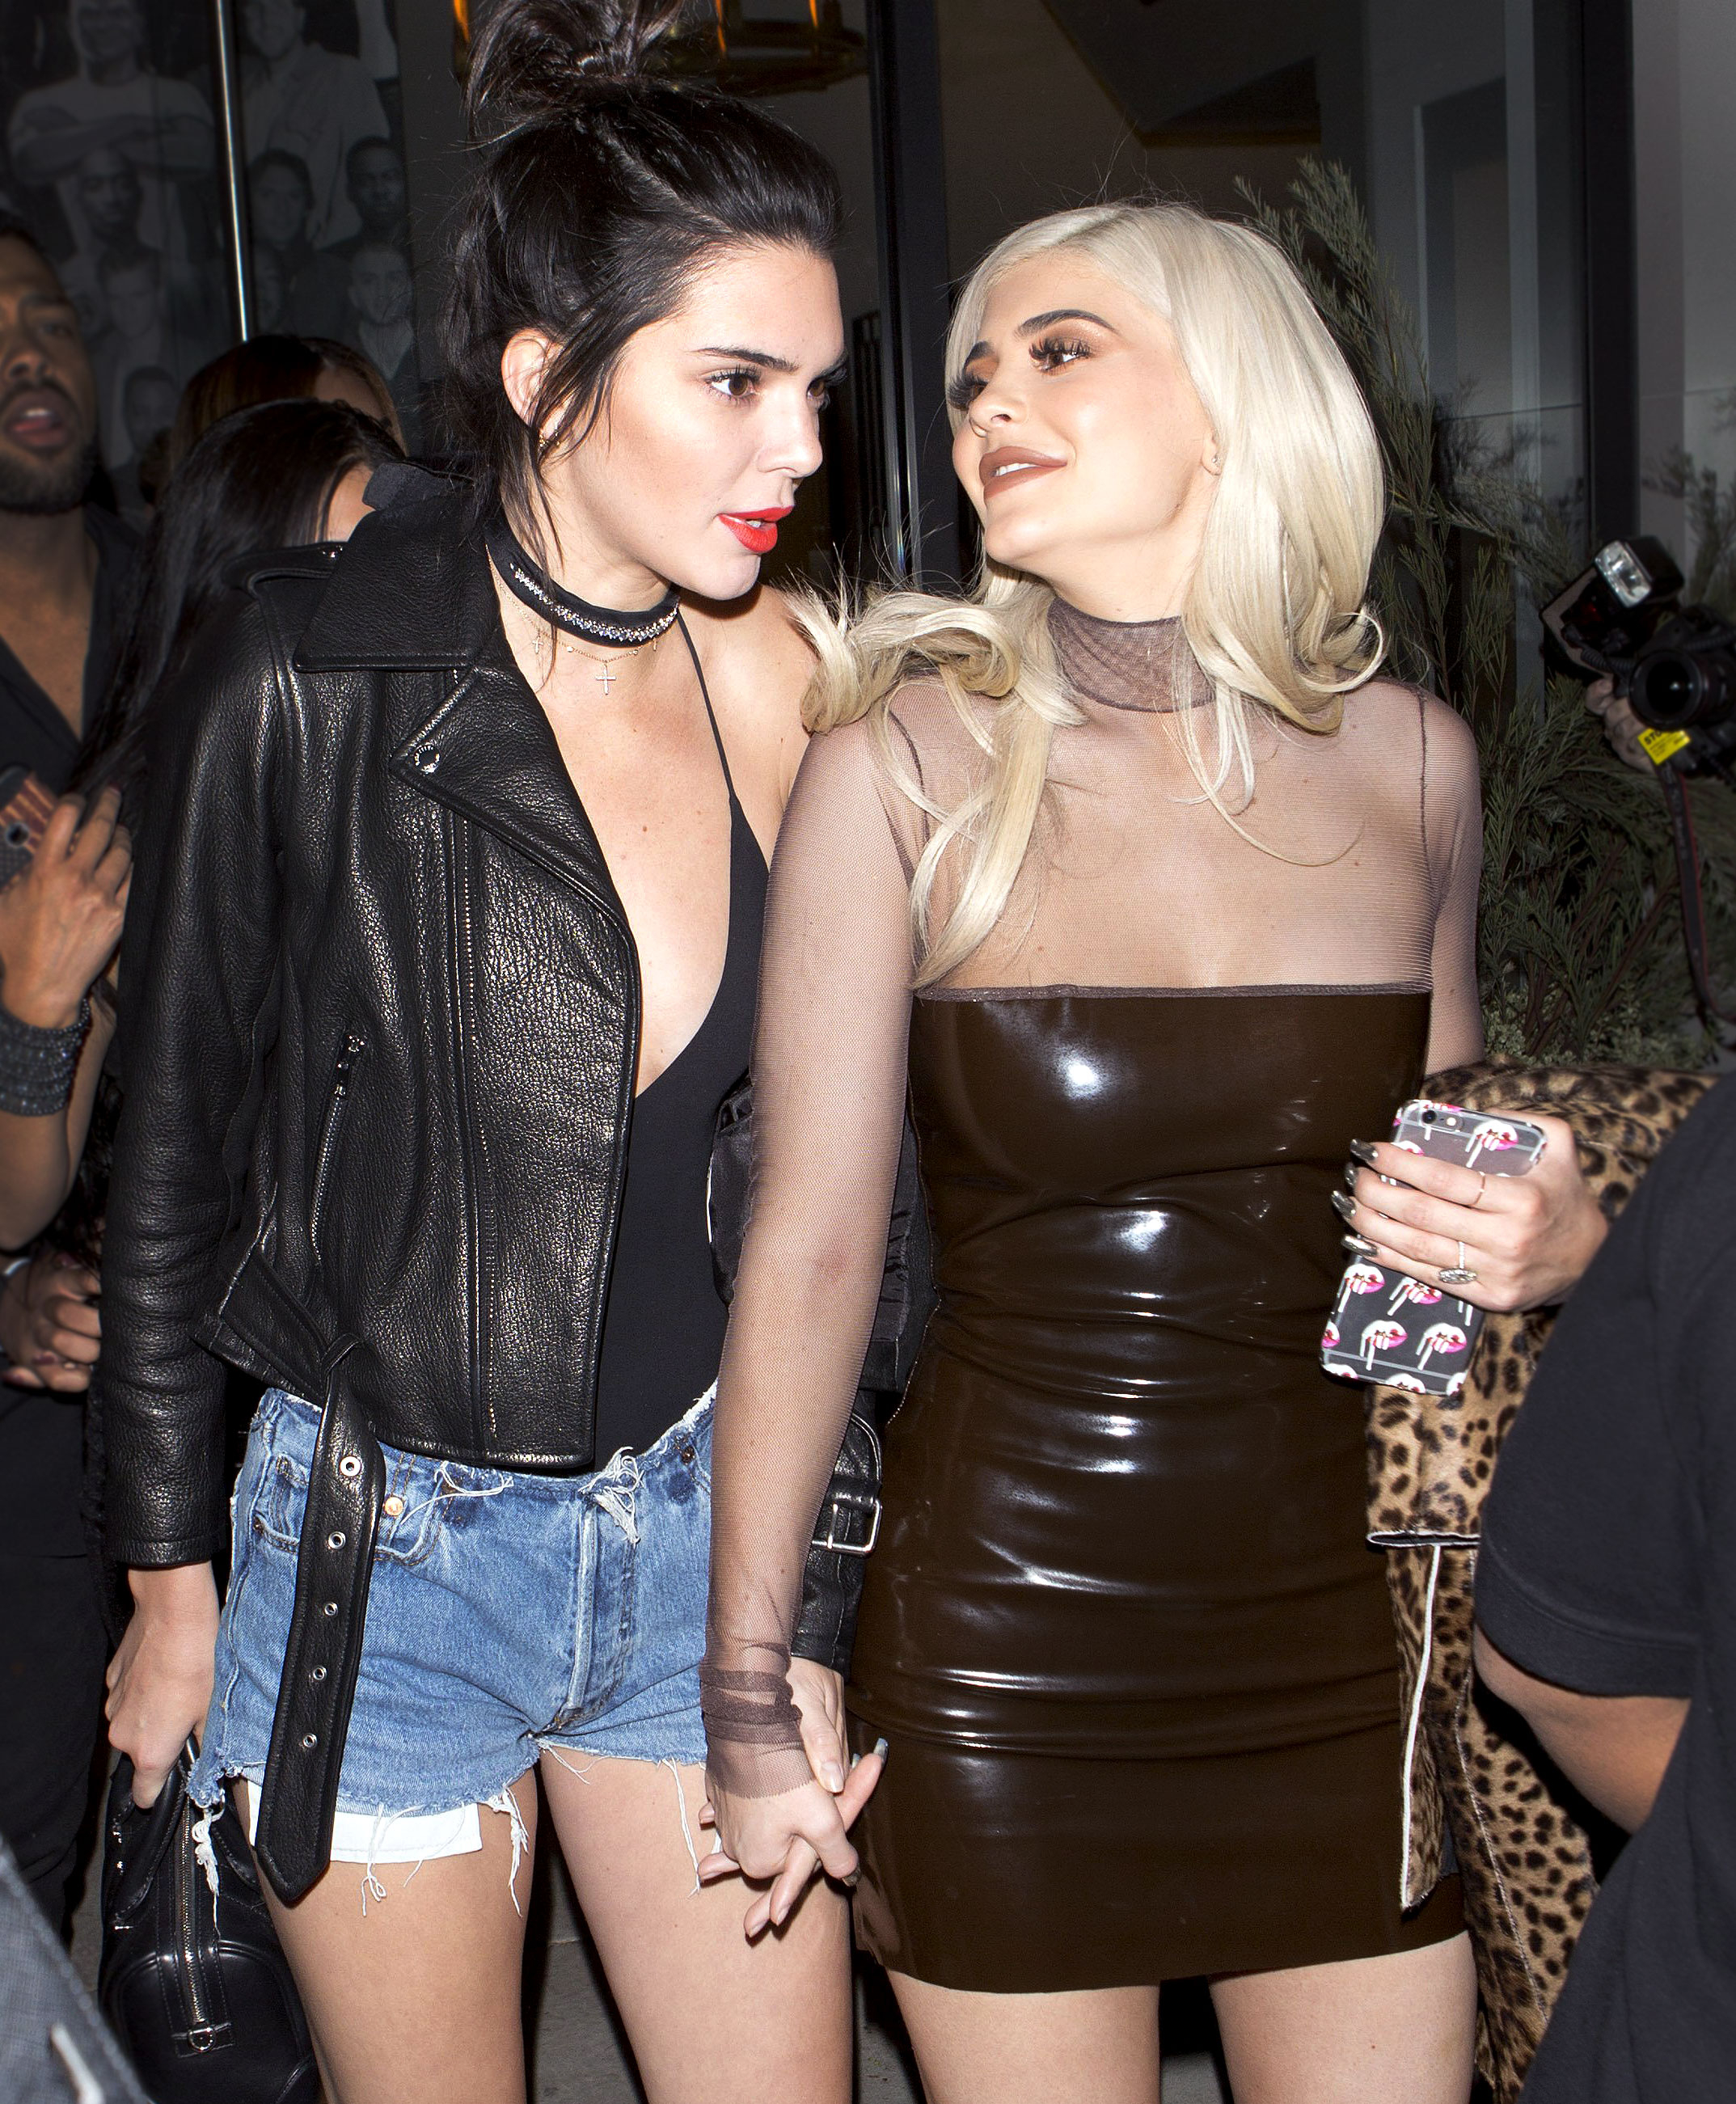 kendall jenner looks stunning in a brown vinyl outfit while